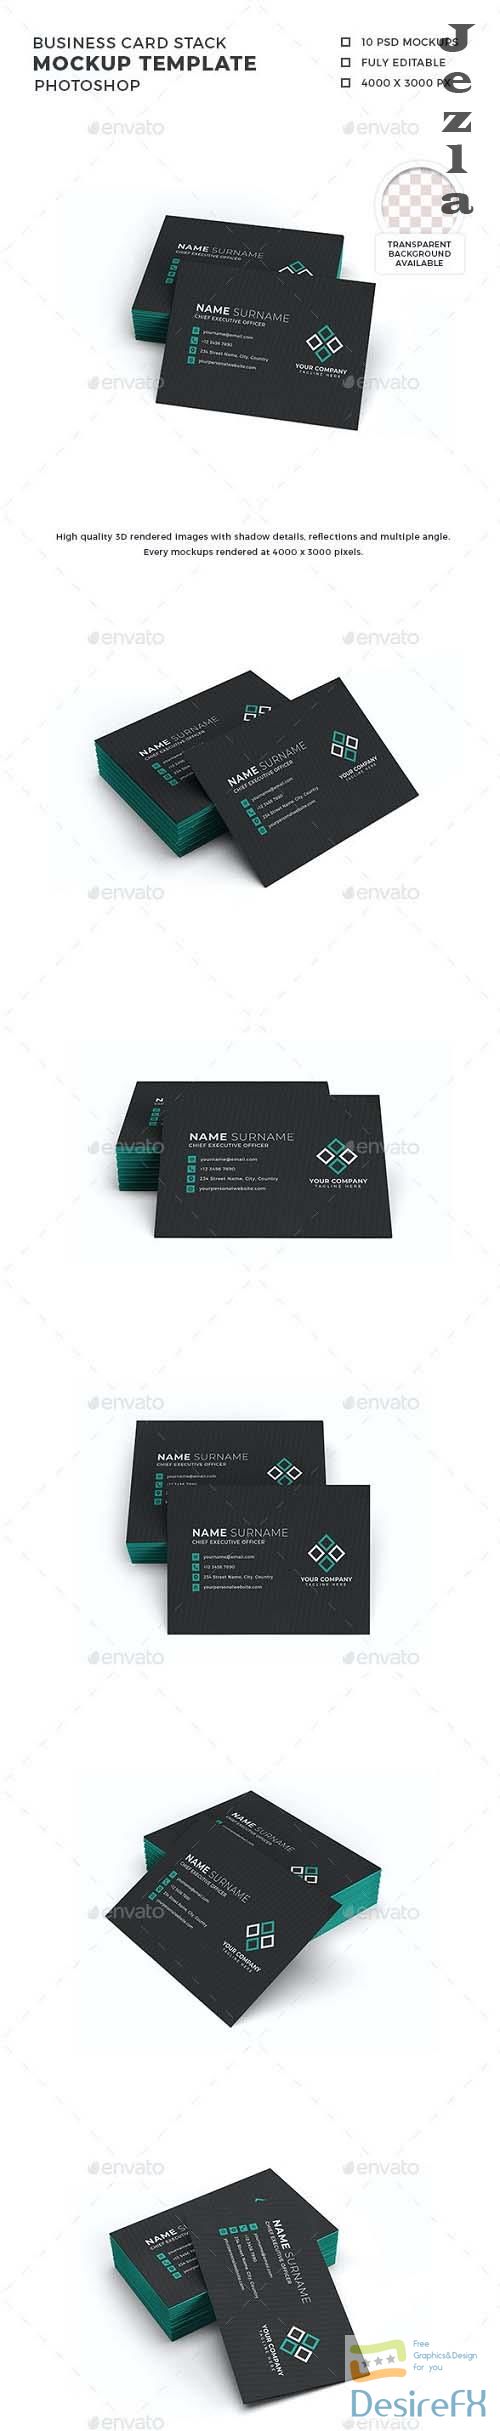 Business Card Stack Mockup Template - 30049199